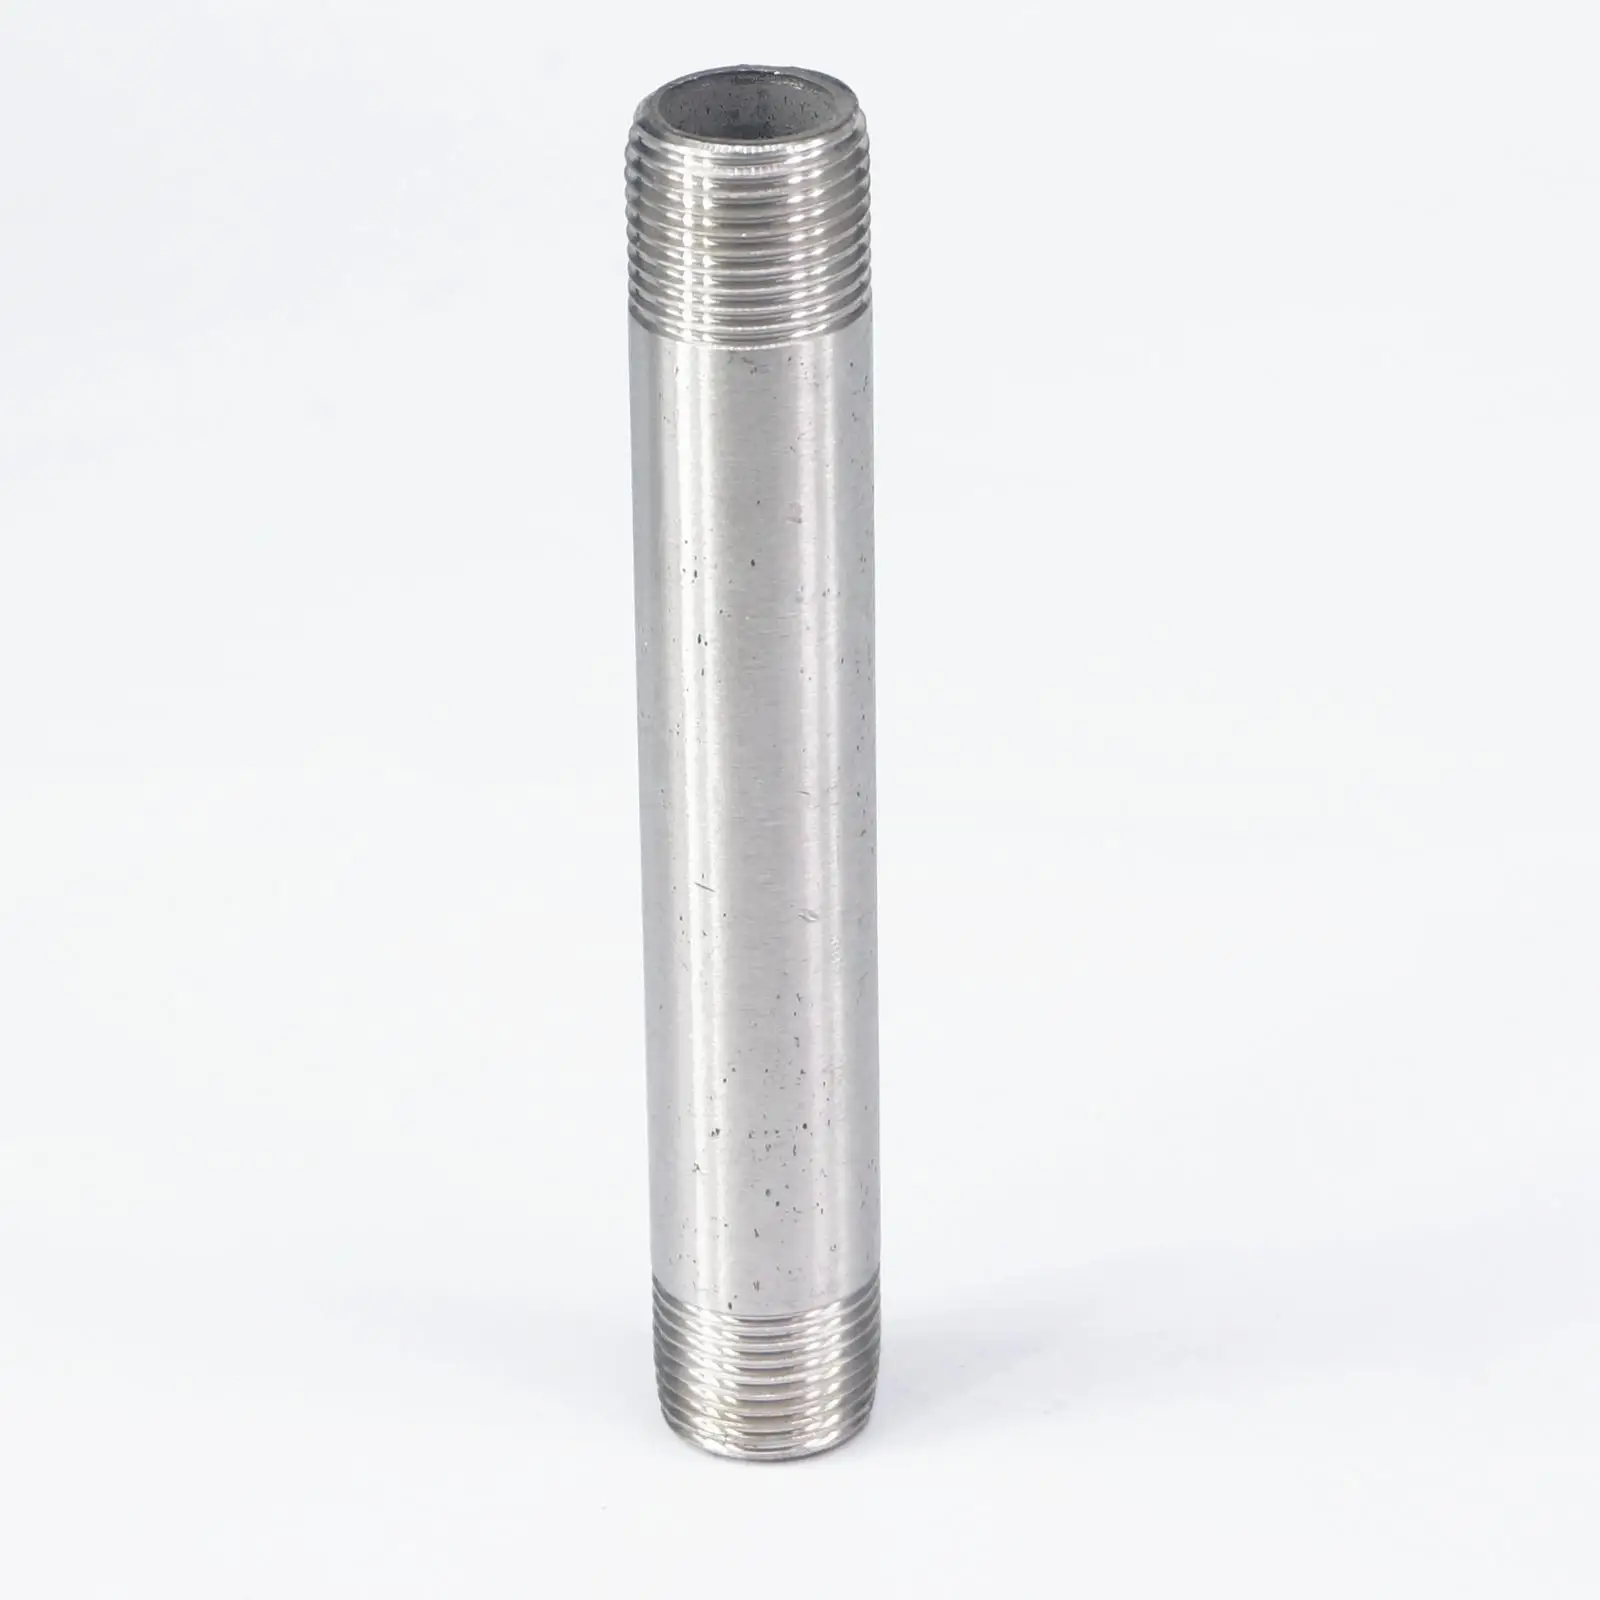 100mm Long 1/8" 1/4" or 3/8" BSPT Male Coupler Stainless Fitting Union Adapter 